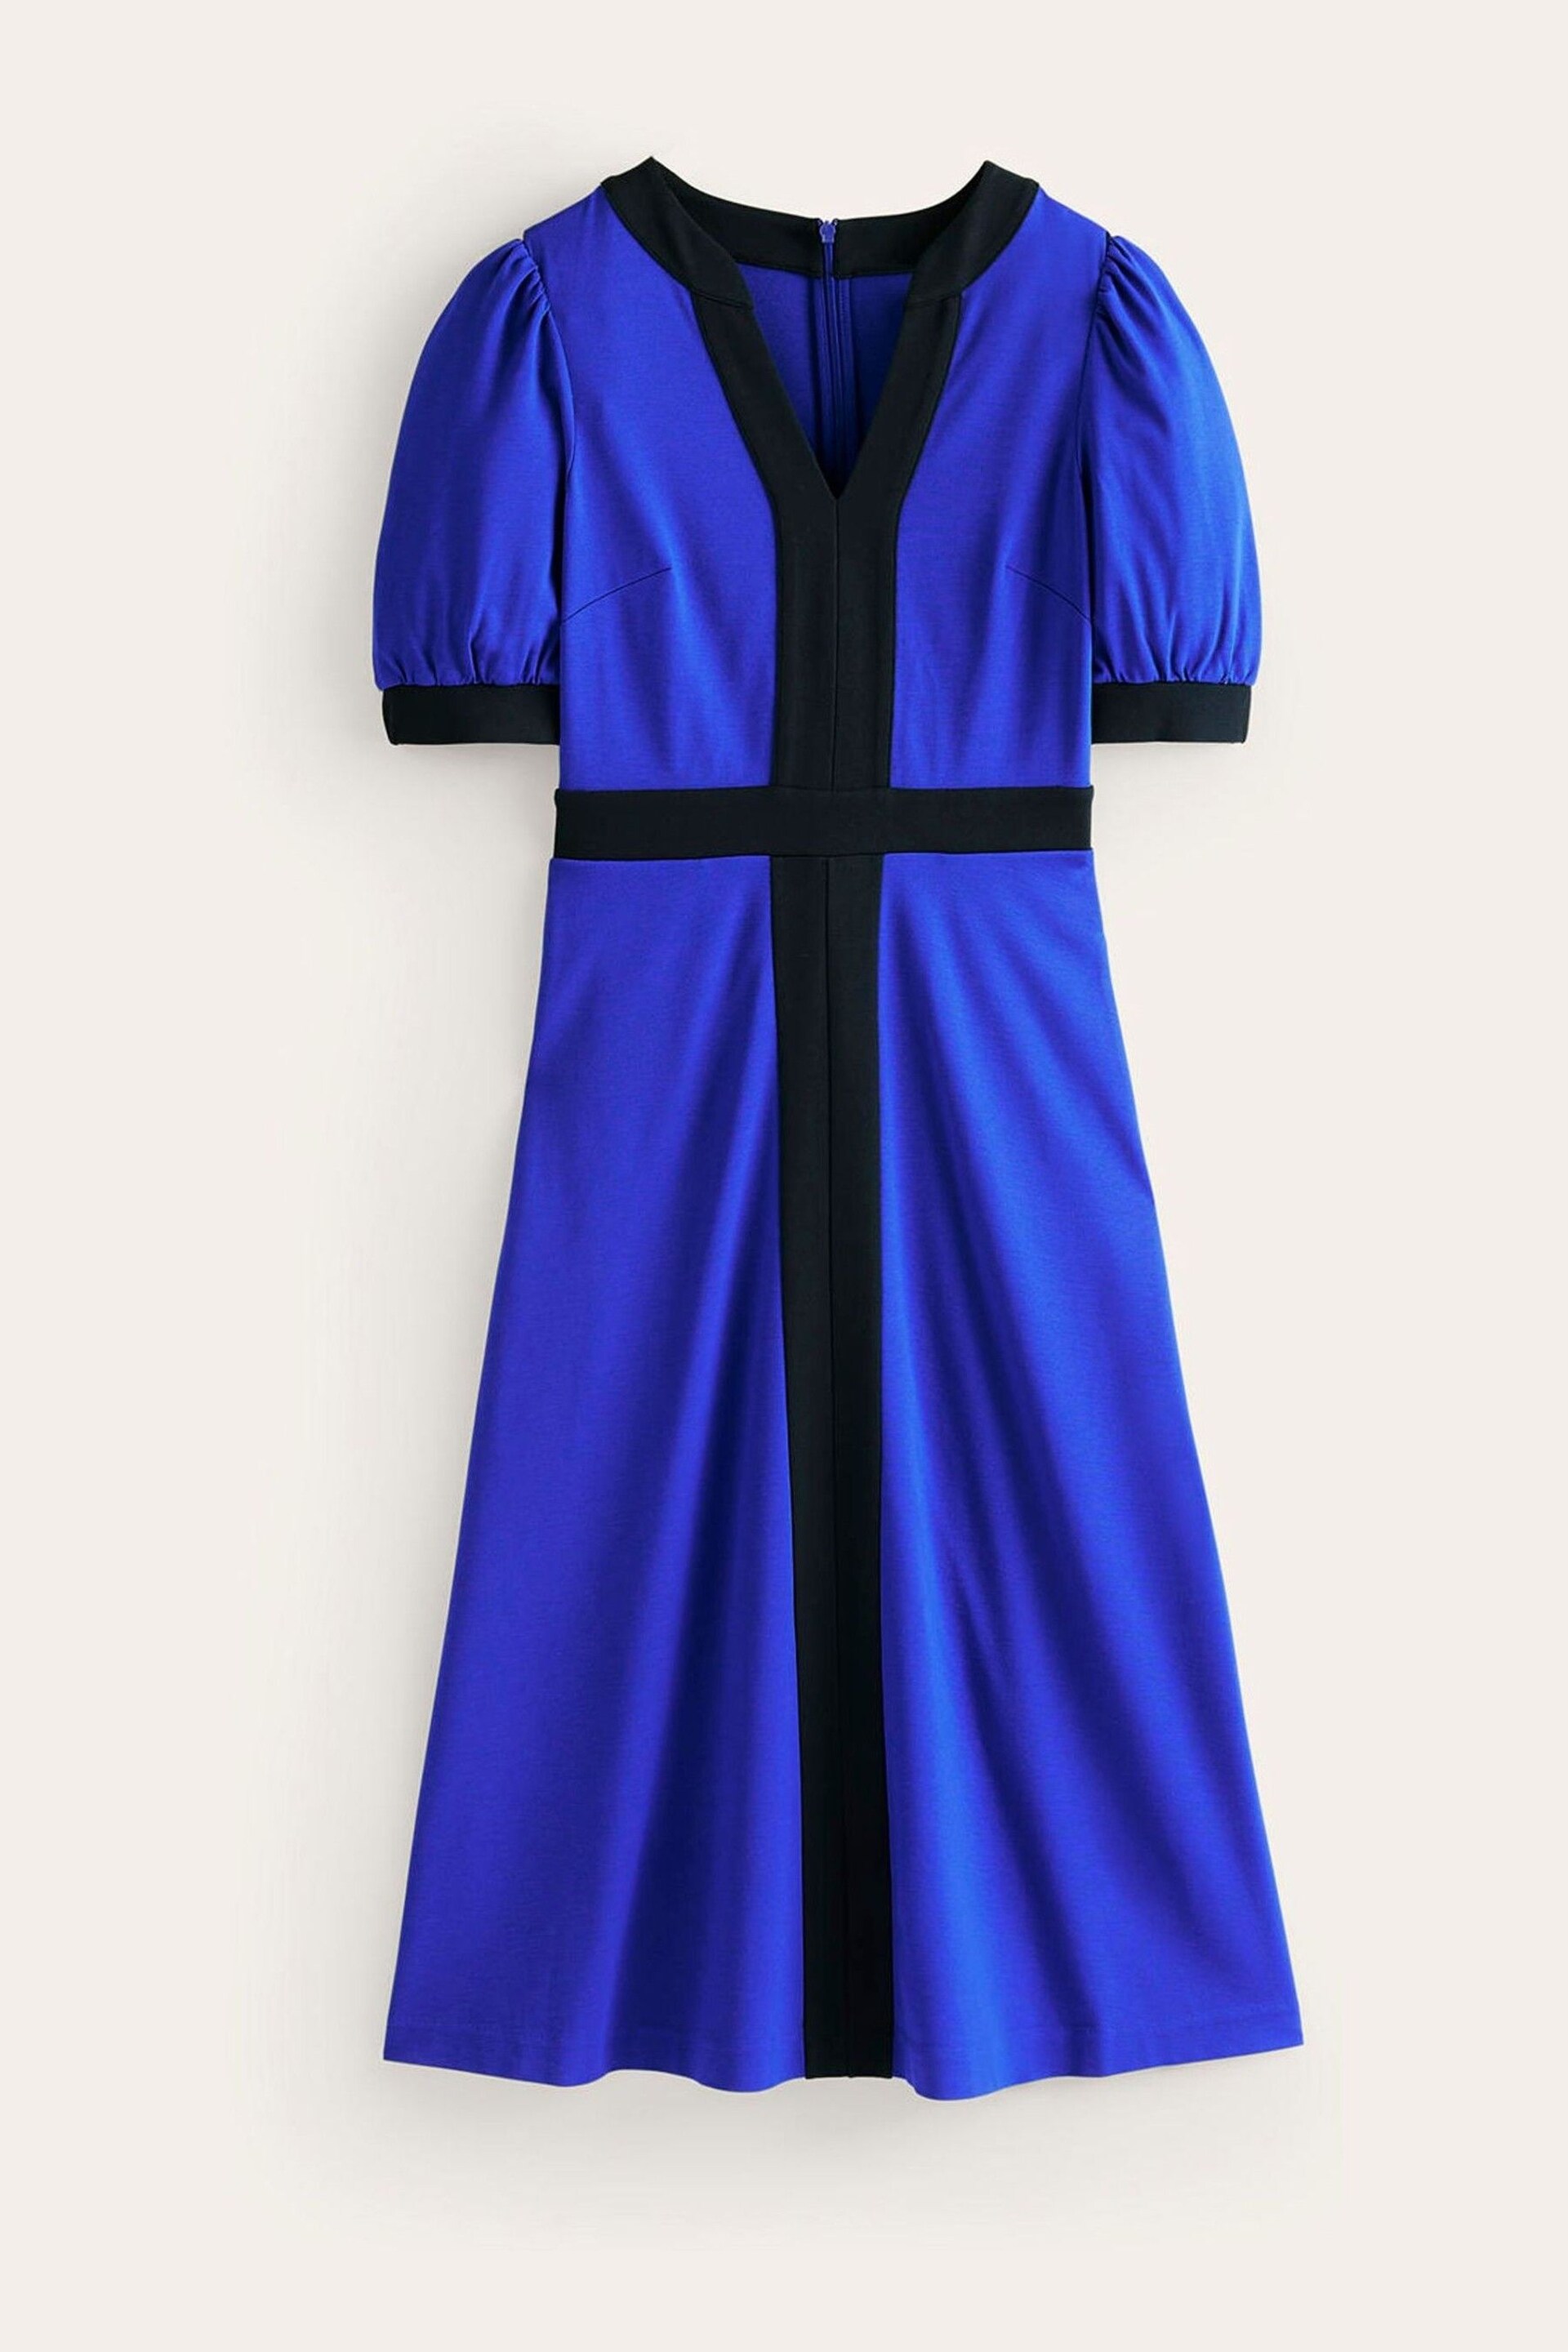 Boden Blue Petra Puff Sleeve Ponte Dress - Image 5 of 5